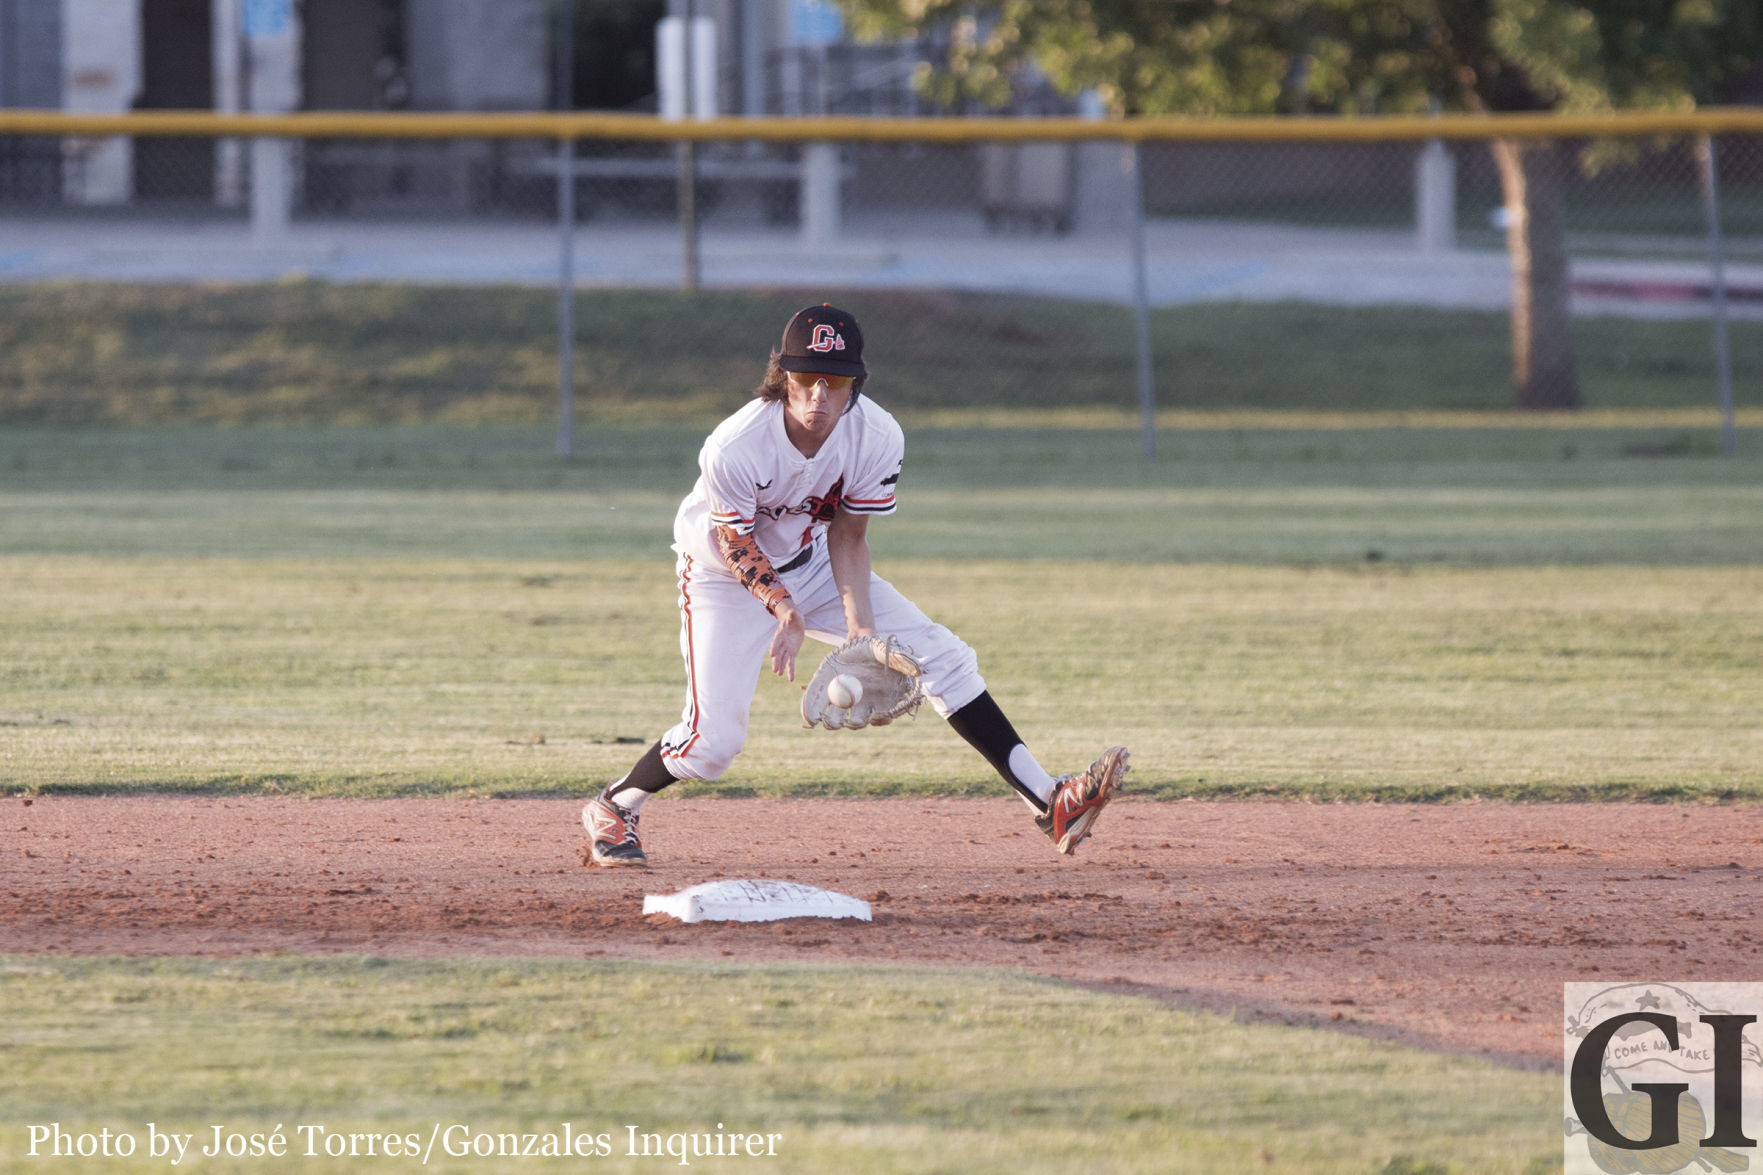 Shortstop Devon Banda (3) makes a routine play near second base in Gonzales’ 11-0 loss against Wimberley. These routine plays are going to be key for the Apaches if they are to beat Austin Eastside Memorial on Tuesday.